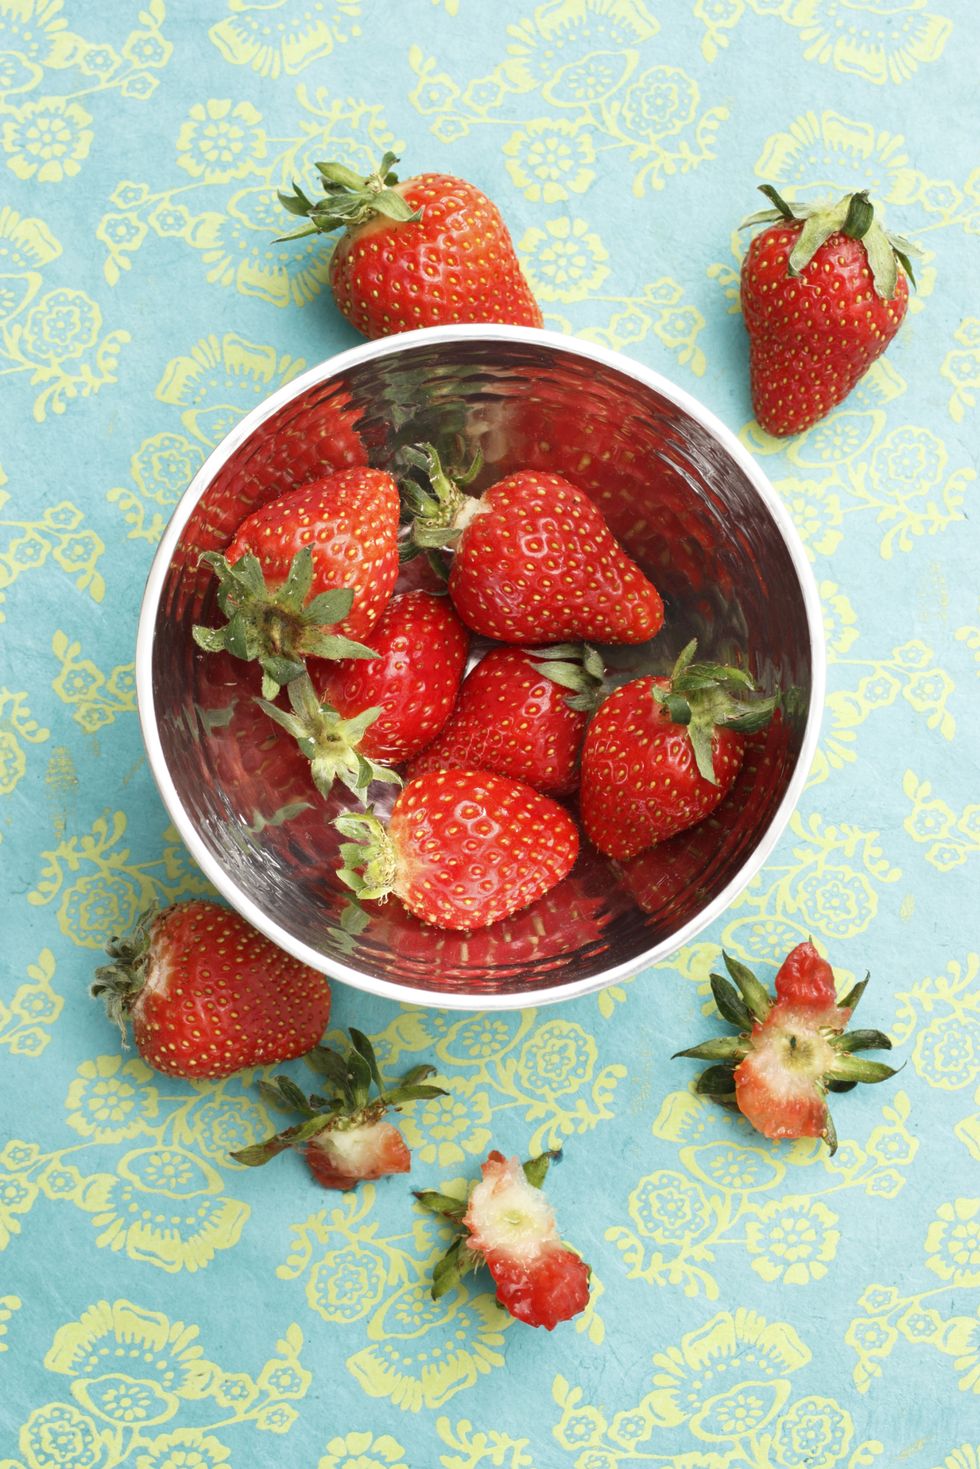 Fruit, Natural foods, Produce, Food, Red, Strawberry, Sweetness, Vegan nutrition, Strawberries, Still life photography, 